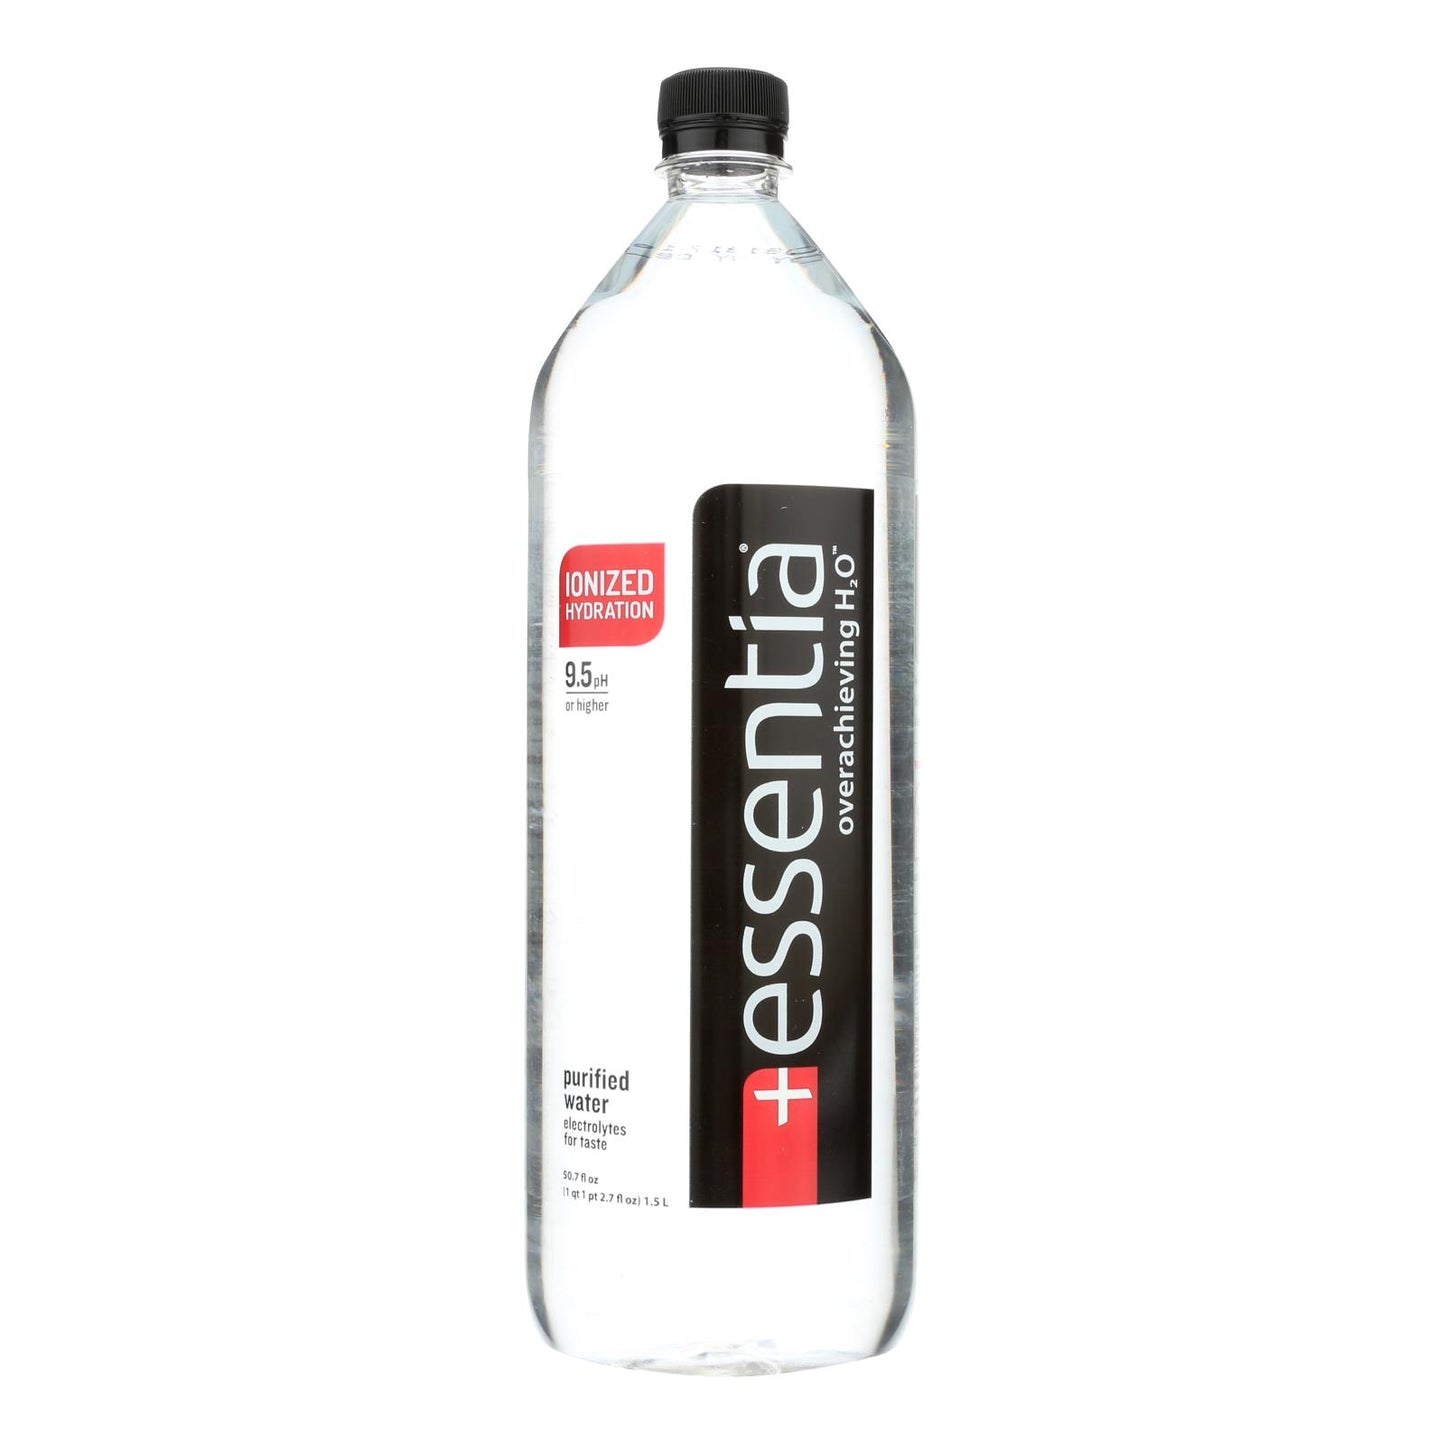 Essentia Hydration Perfected Drinking Water - 9.5 Ph. - Case Of 12 - 1.5 Liter